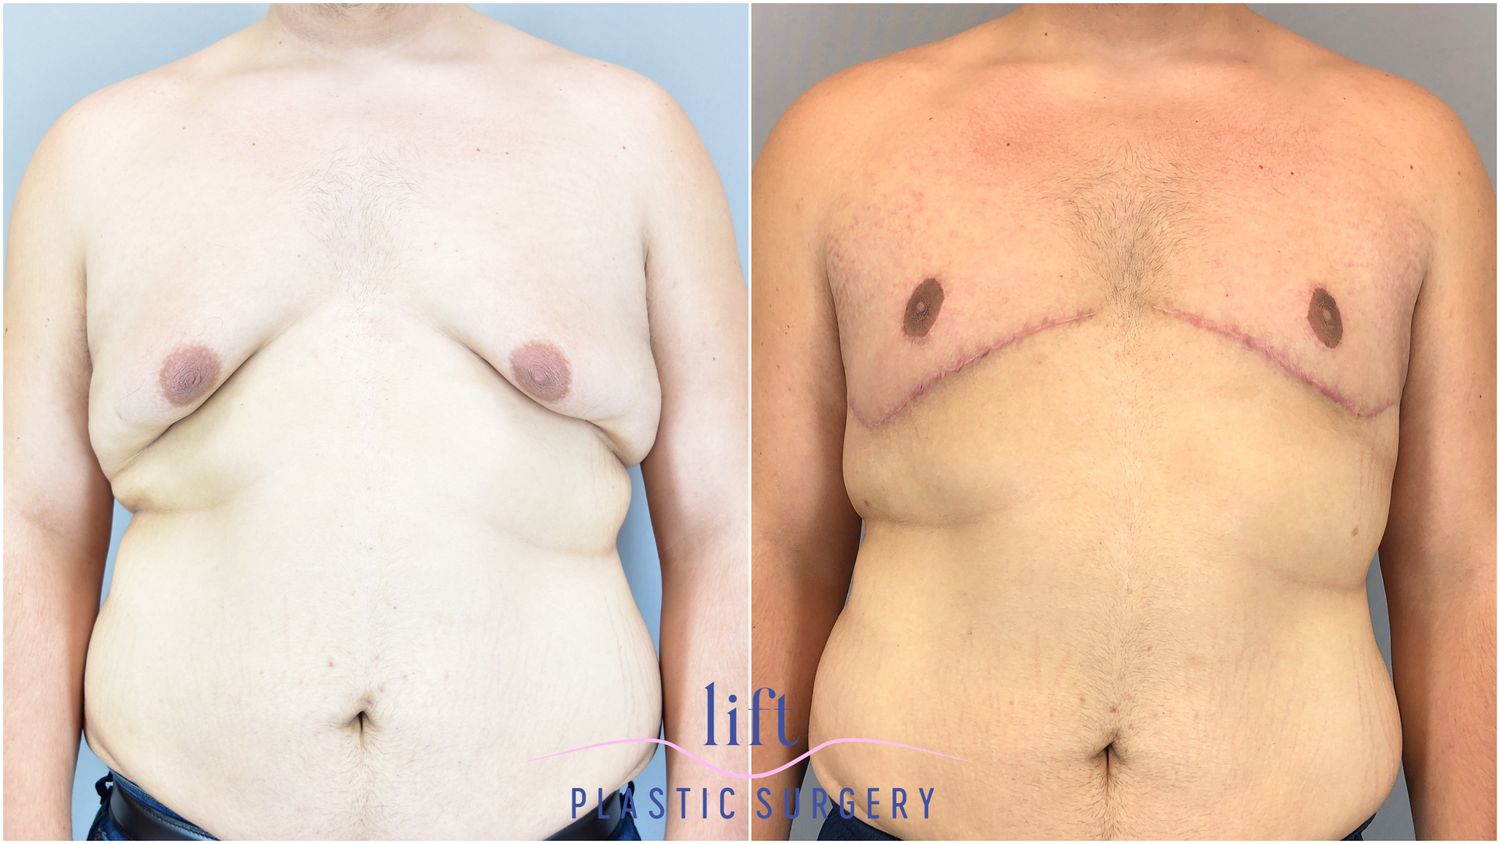 Male Breast Reduction (Gynecomastia) Before &#038; After Photos